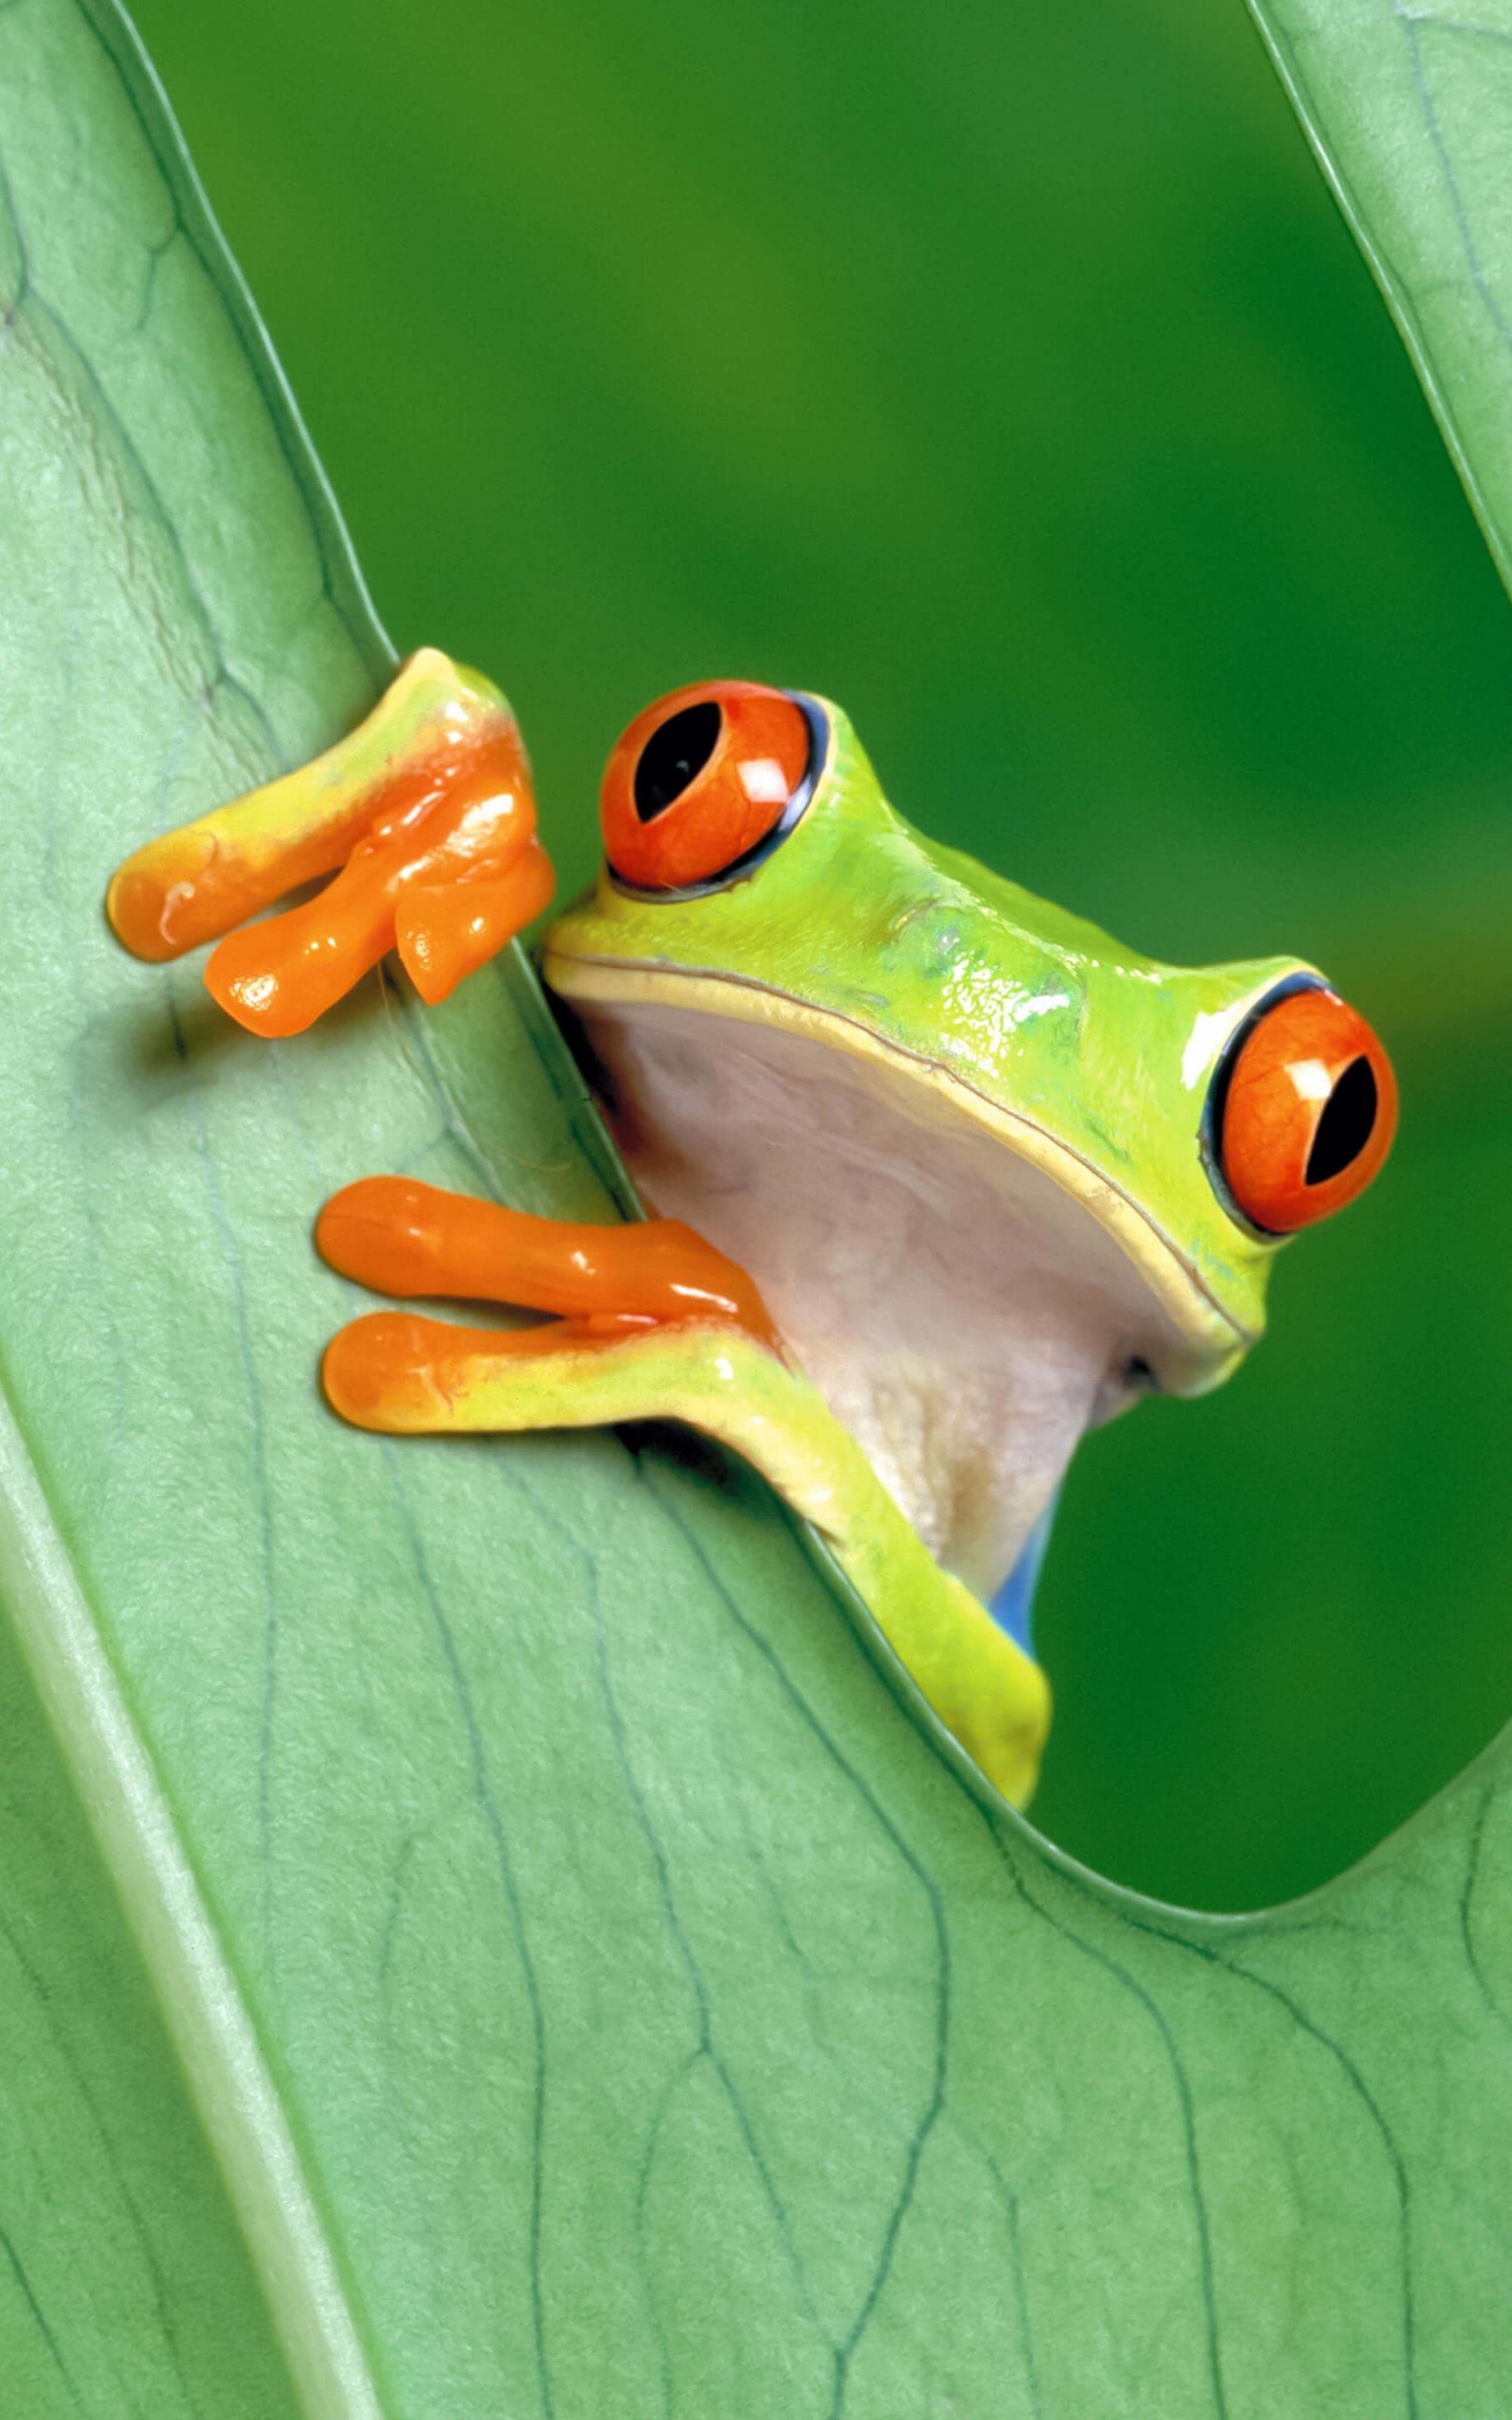 Red Eyed Tree Frog Wallpaper for Amazon Kindle Fire HDX 8.9